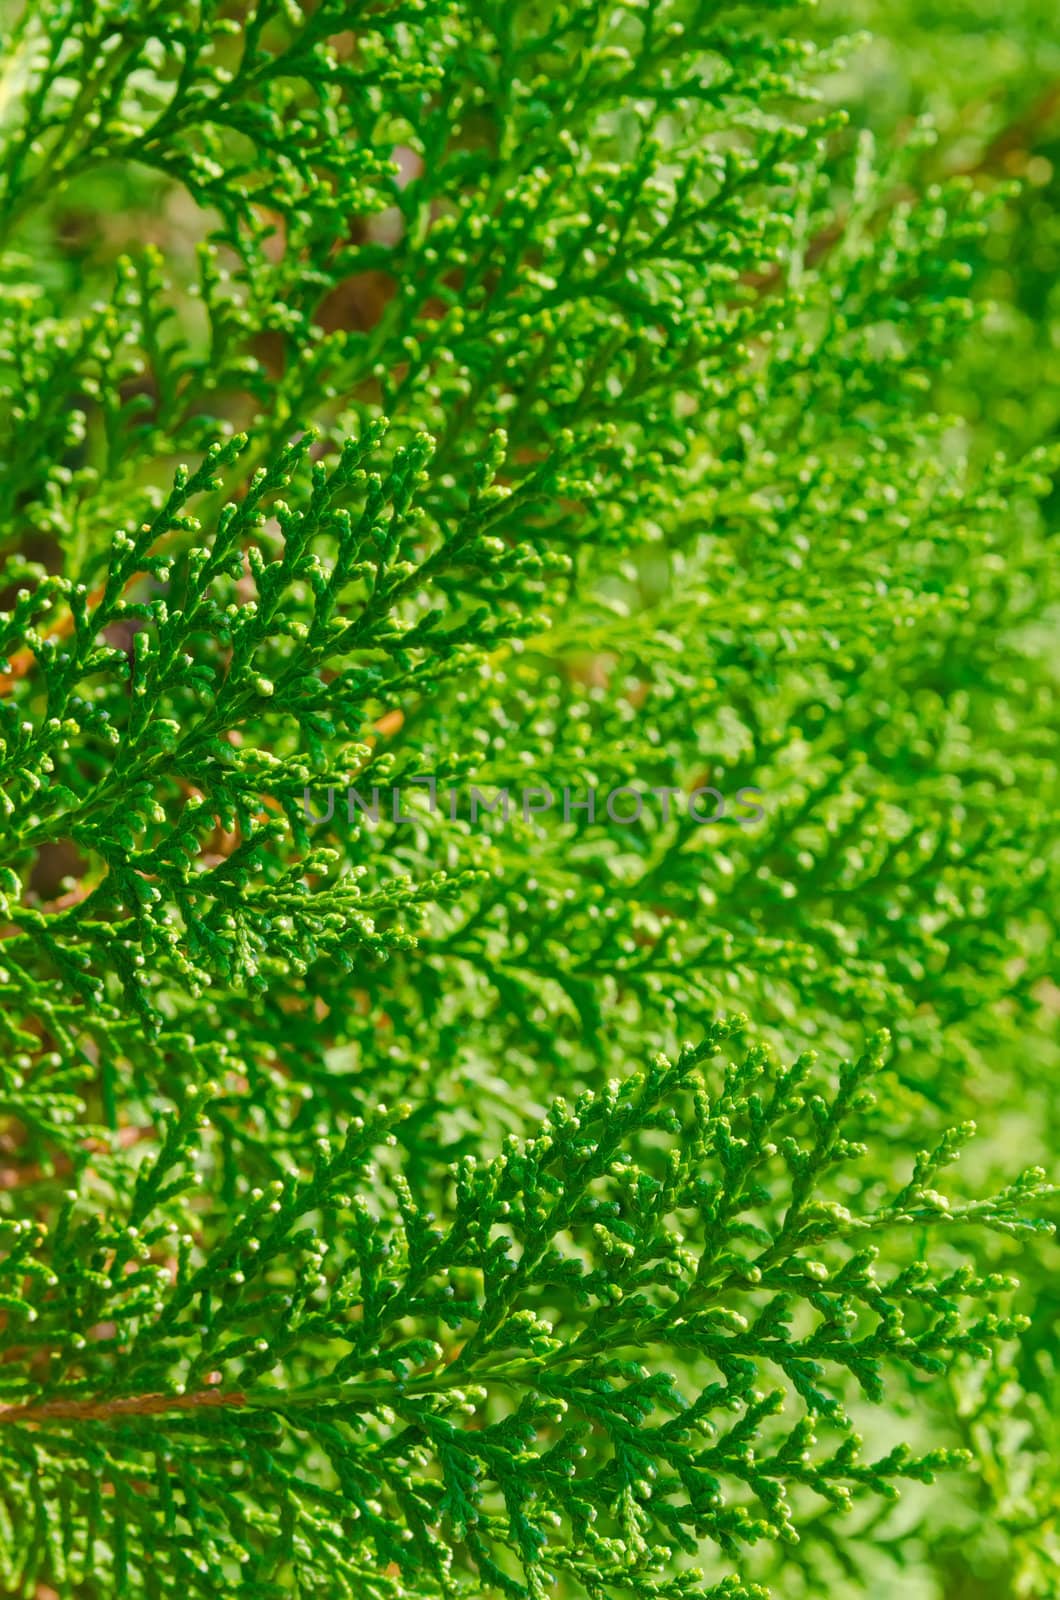 saturated green leaves of thuja. Bright lush foliage background